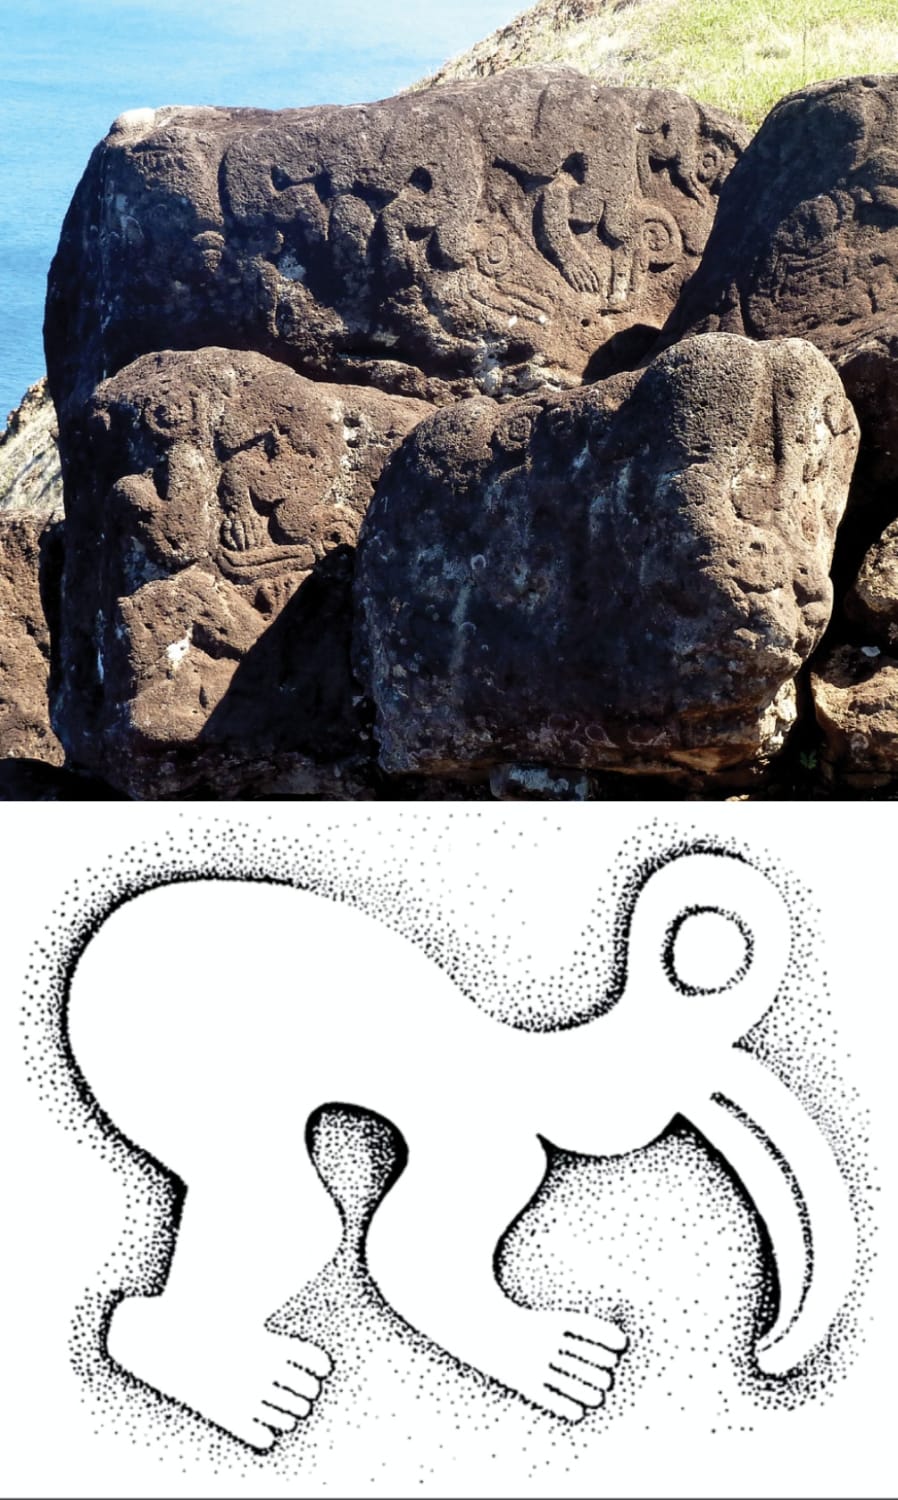 Old petroglyphs of Birdmen in Easter Island, which were probably carved to commemorate some of the winners of Tangata manu, an annual competition to collect the first sooty tern egg of the season from the islet of Motu Nui, in a very dangerous race where many contestants were killed